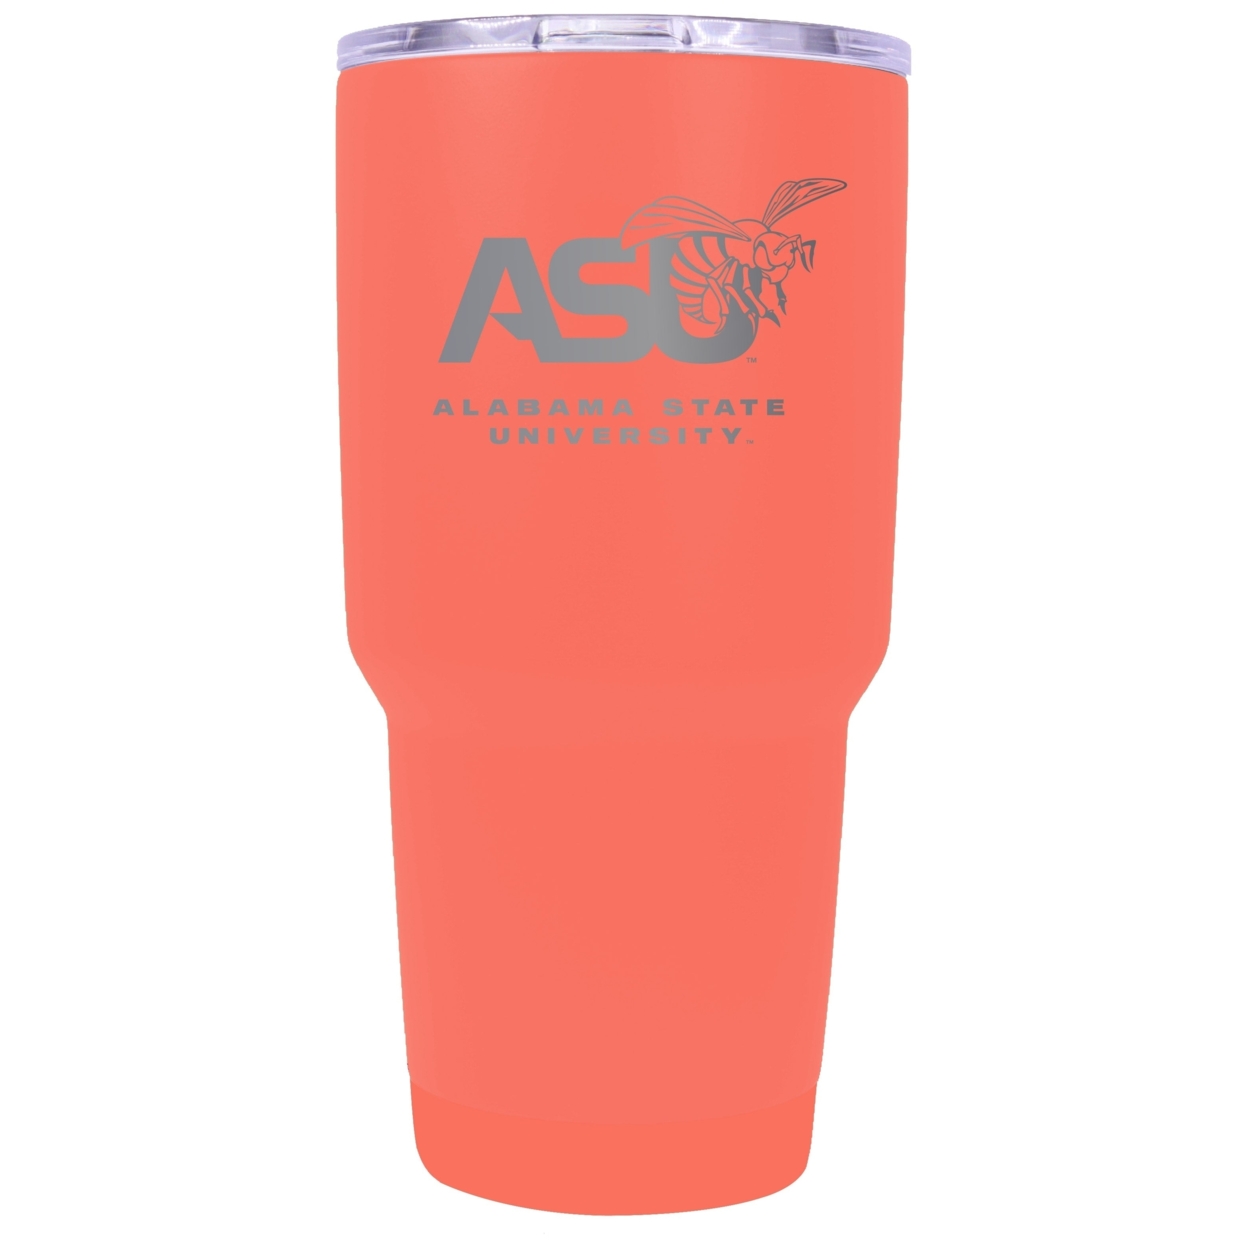 Alabama State University 24 Oz Insulated Tumbler Etched - Choose Your Color